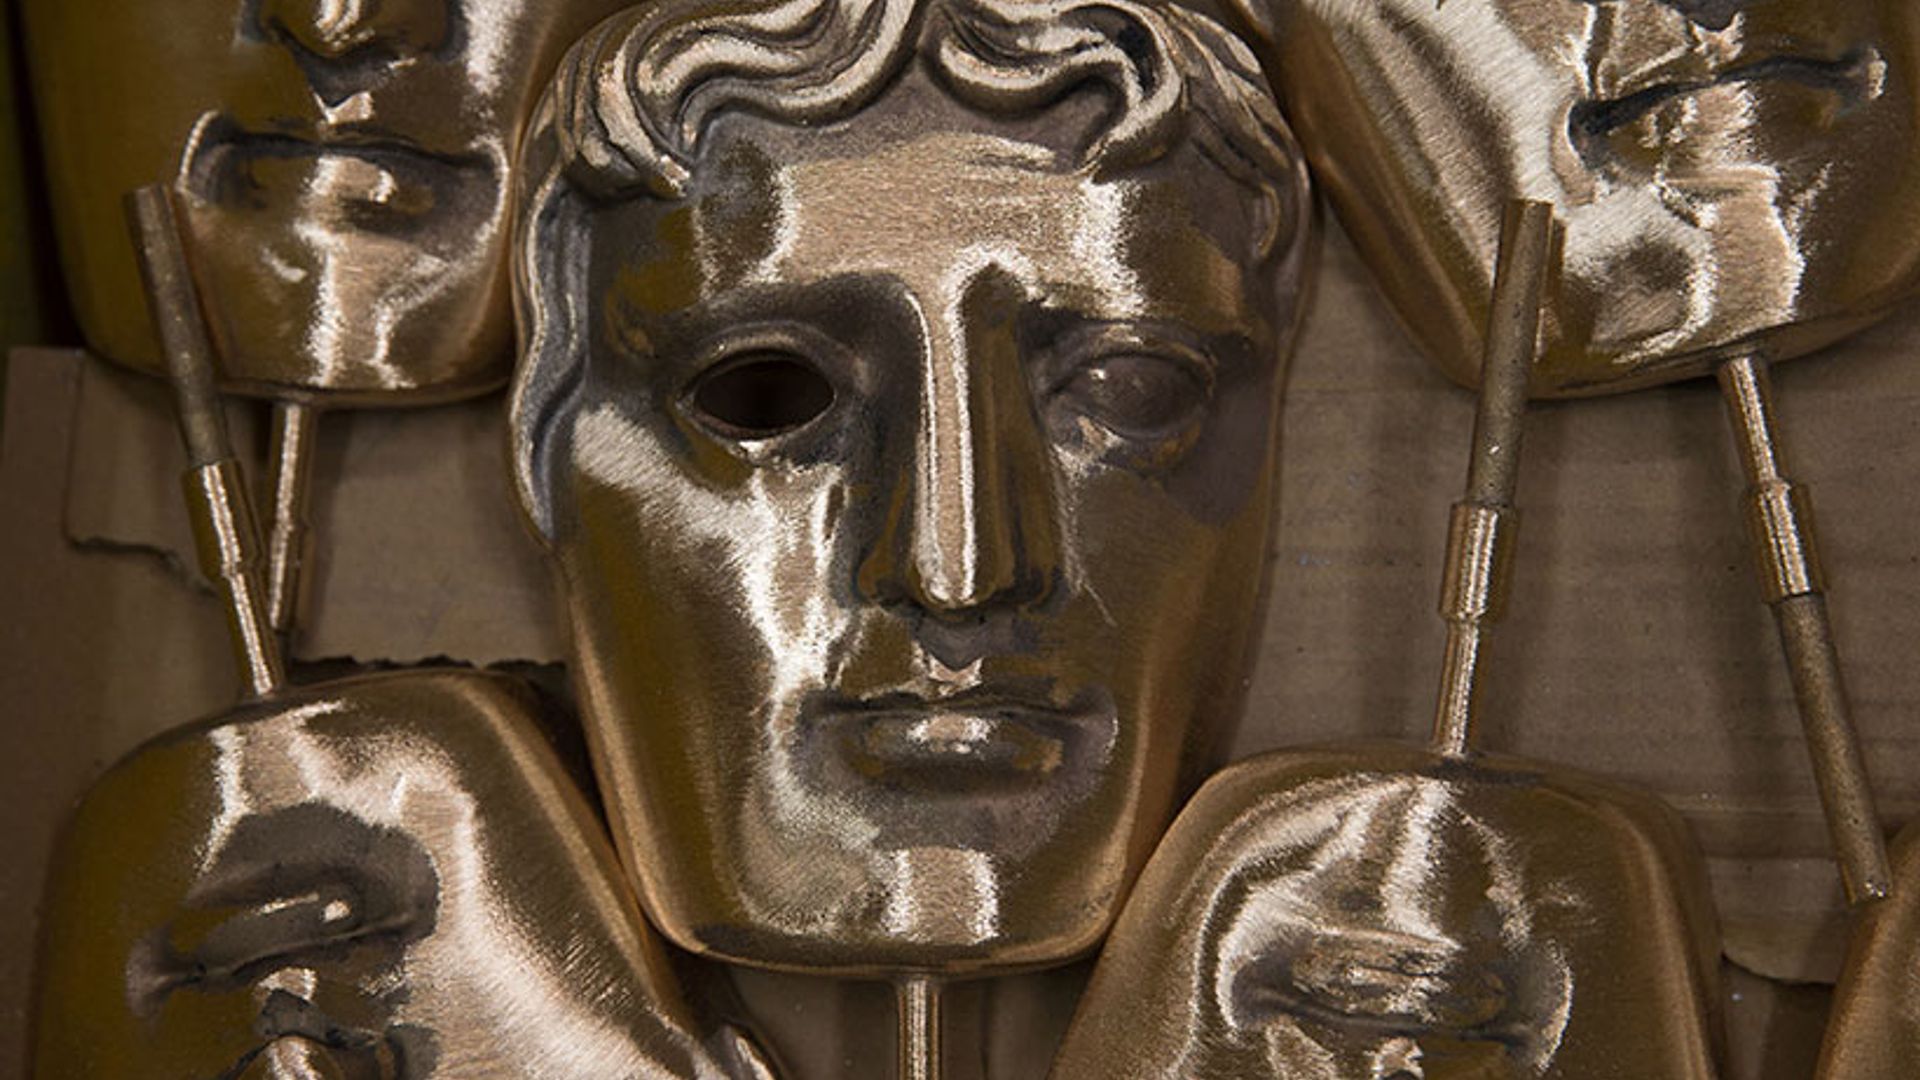 BAFTA TV awards 2017: Watch LIVE from the red carpet